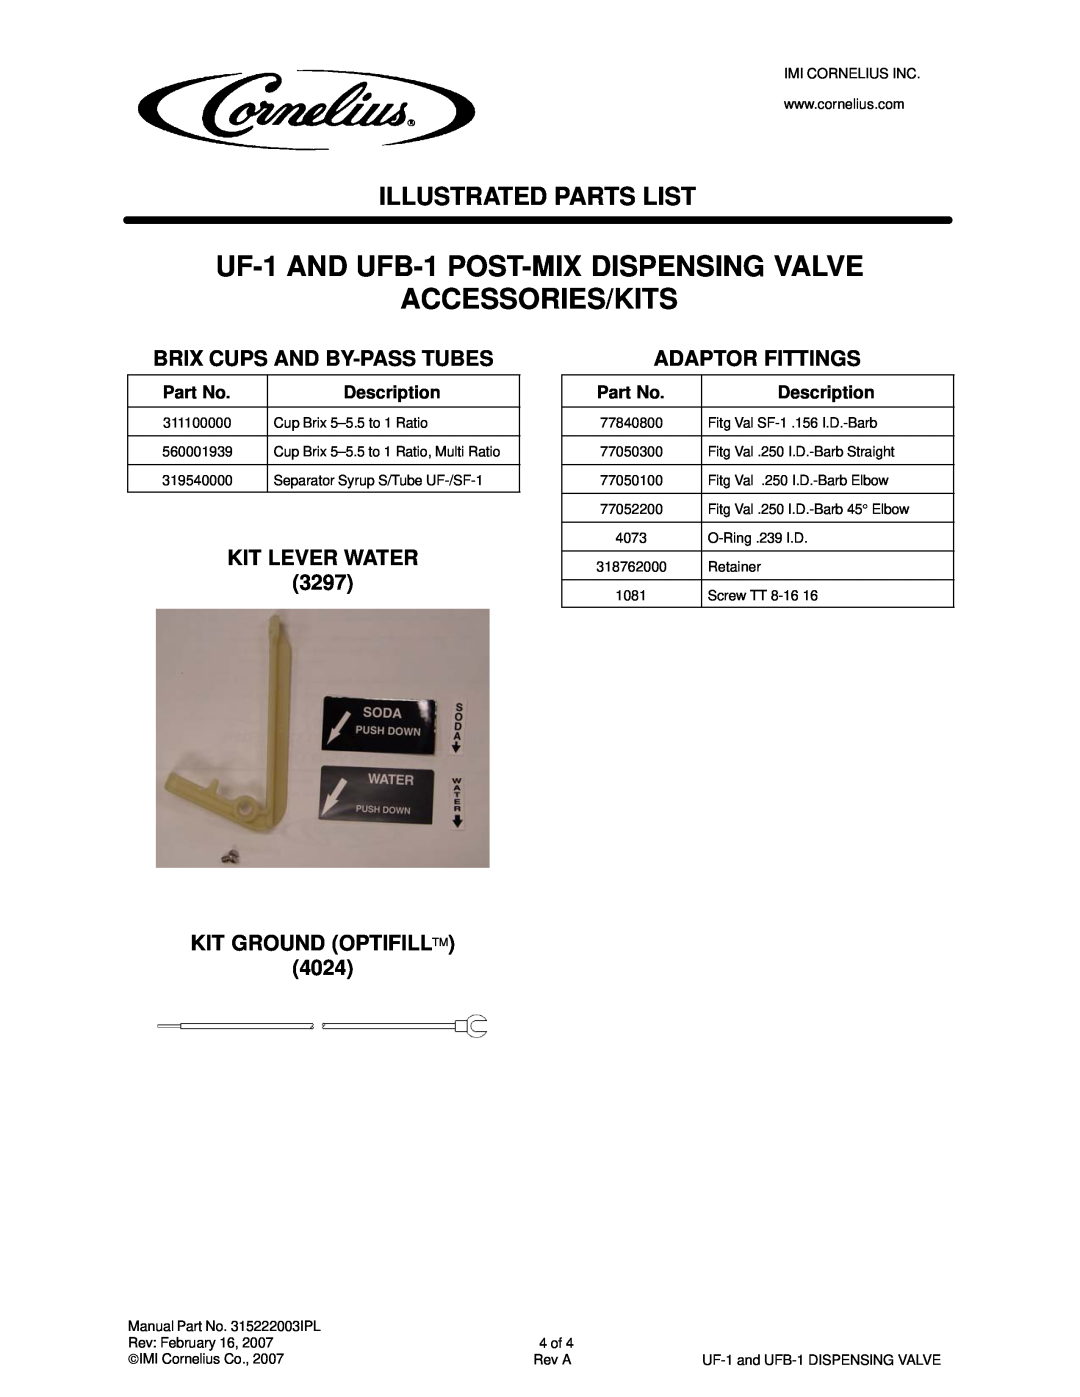 Panasonic Accessories/Kits, UF-1AND UFB-1 POST-MIXDISPENSING VALVE, Illustrated Parts List, Brix Cups And By-Passtubes 